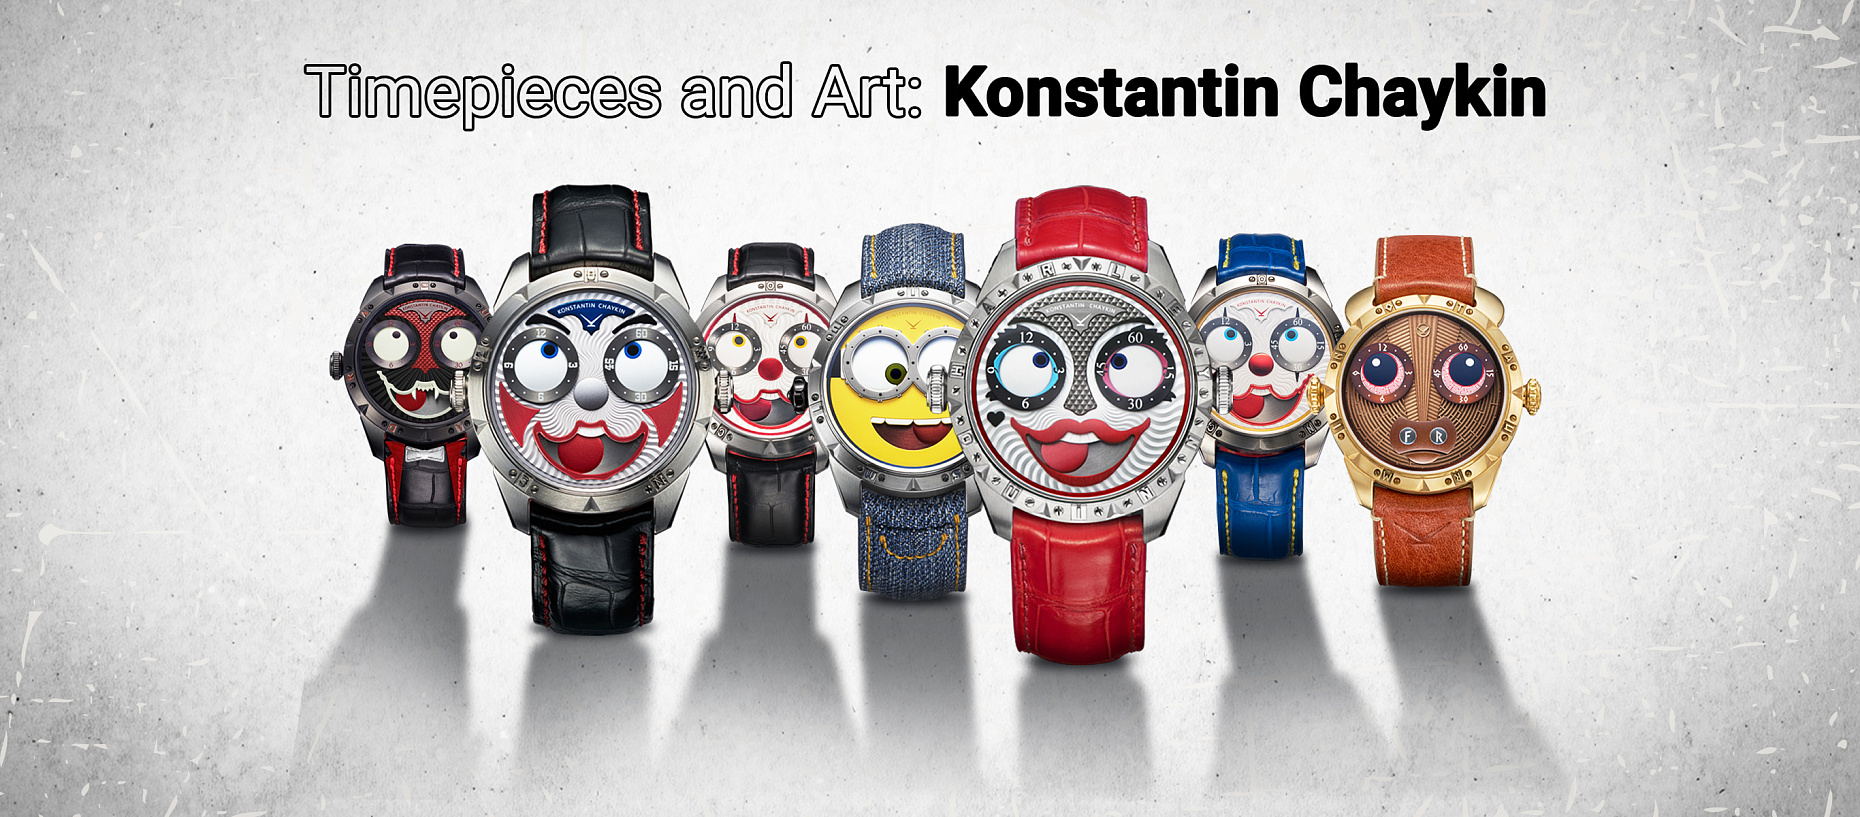 The summary of the auction Timepieces and Art: Konstantin Chaykin, August 20-30, 2022